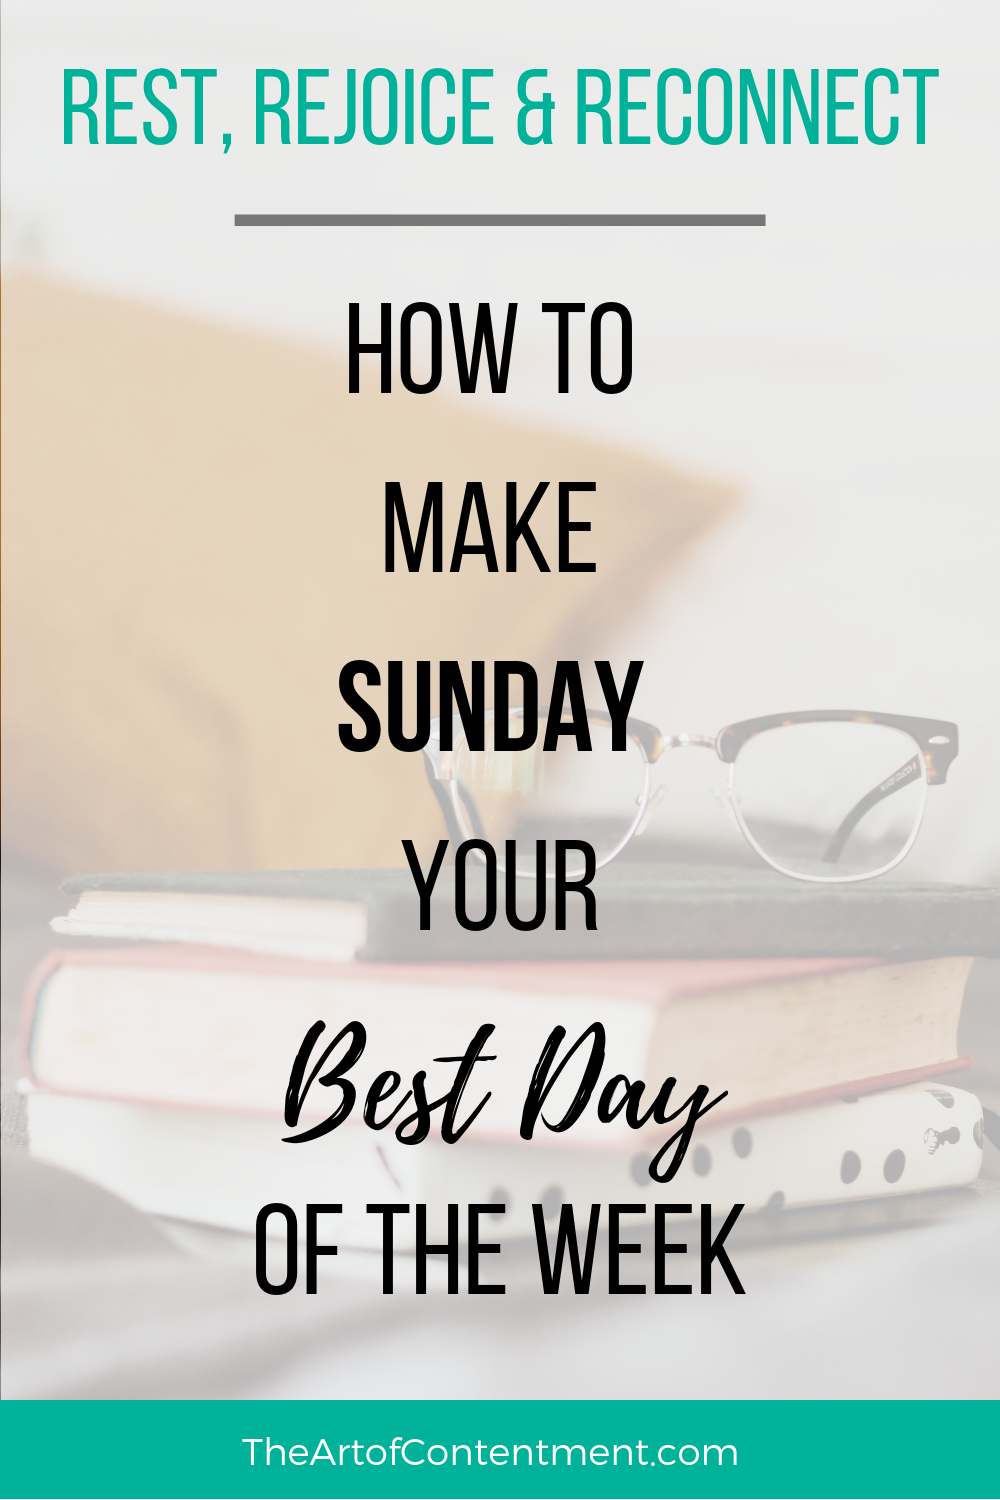 https://seekinggodwithjoy.com/wp-content/uploads/2019/03/how-to-make-sunday-your-best-day-of-the-week.png